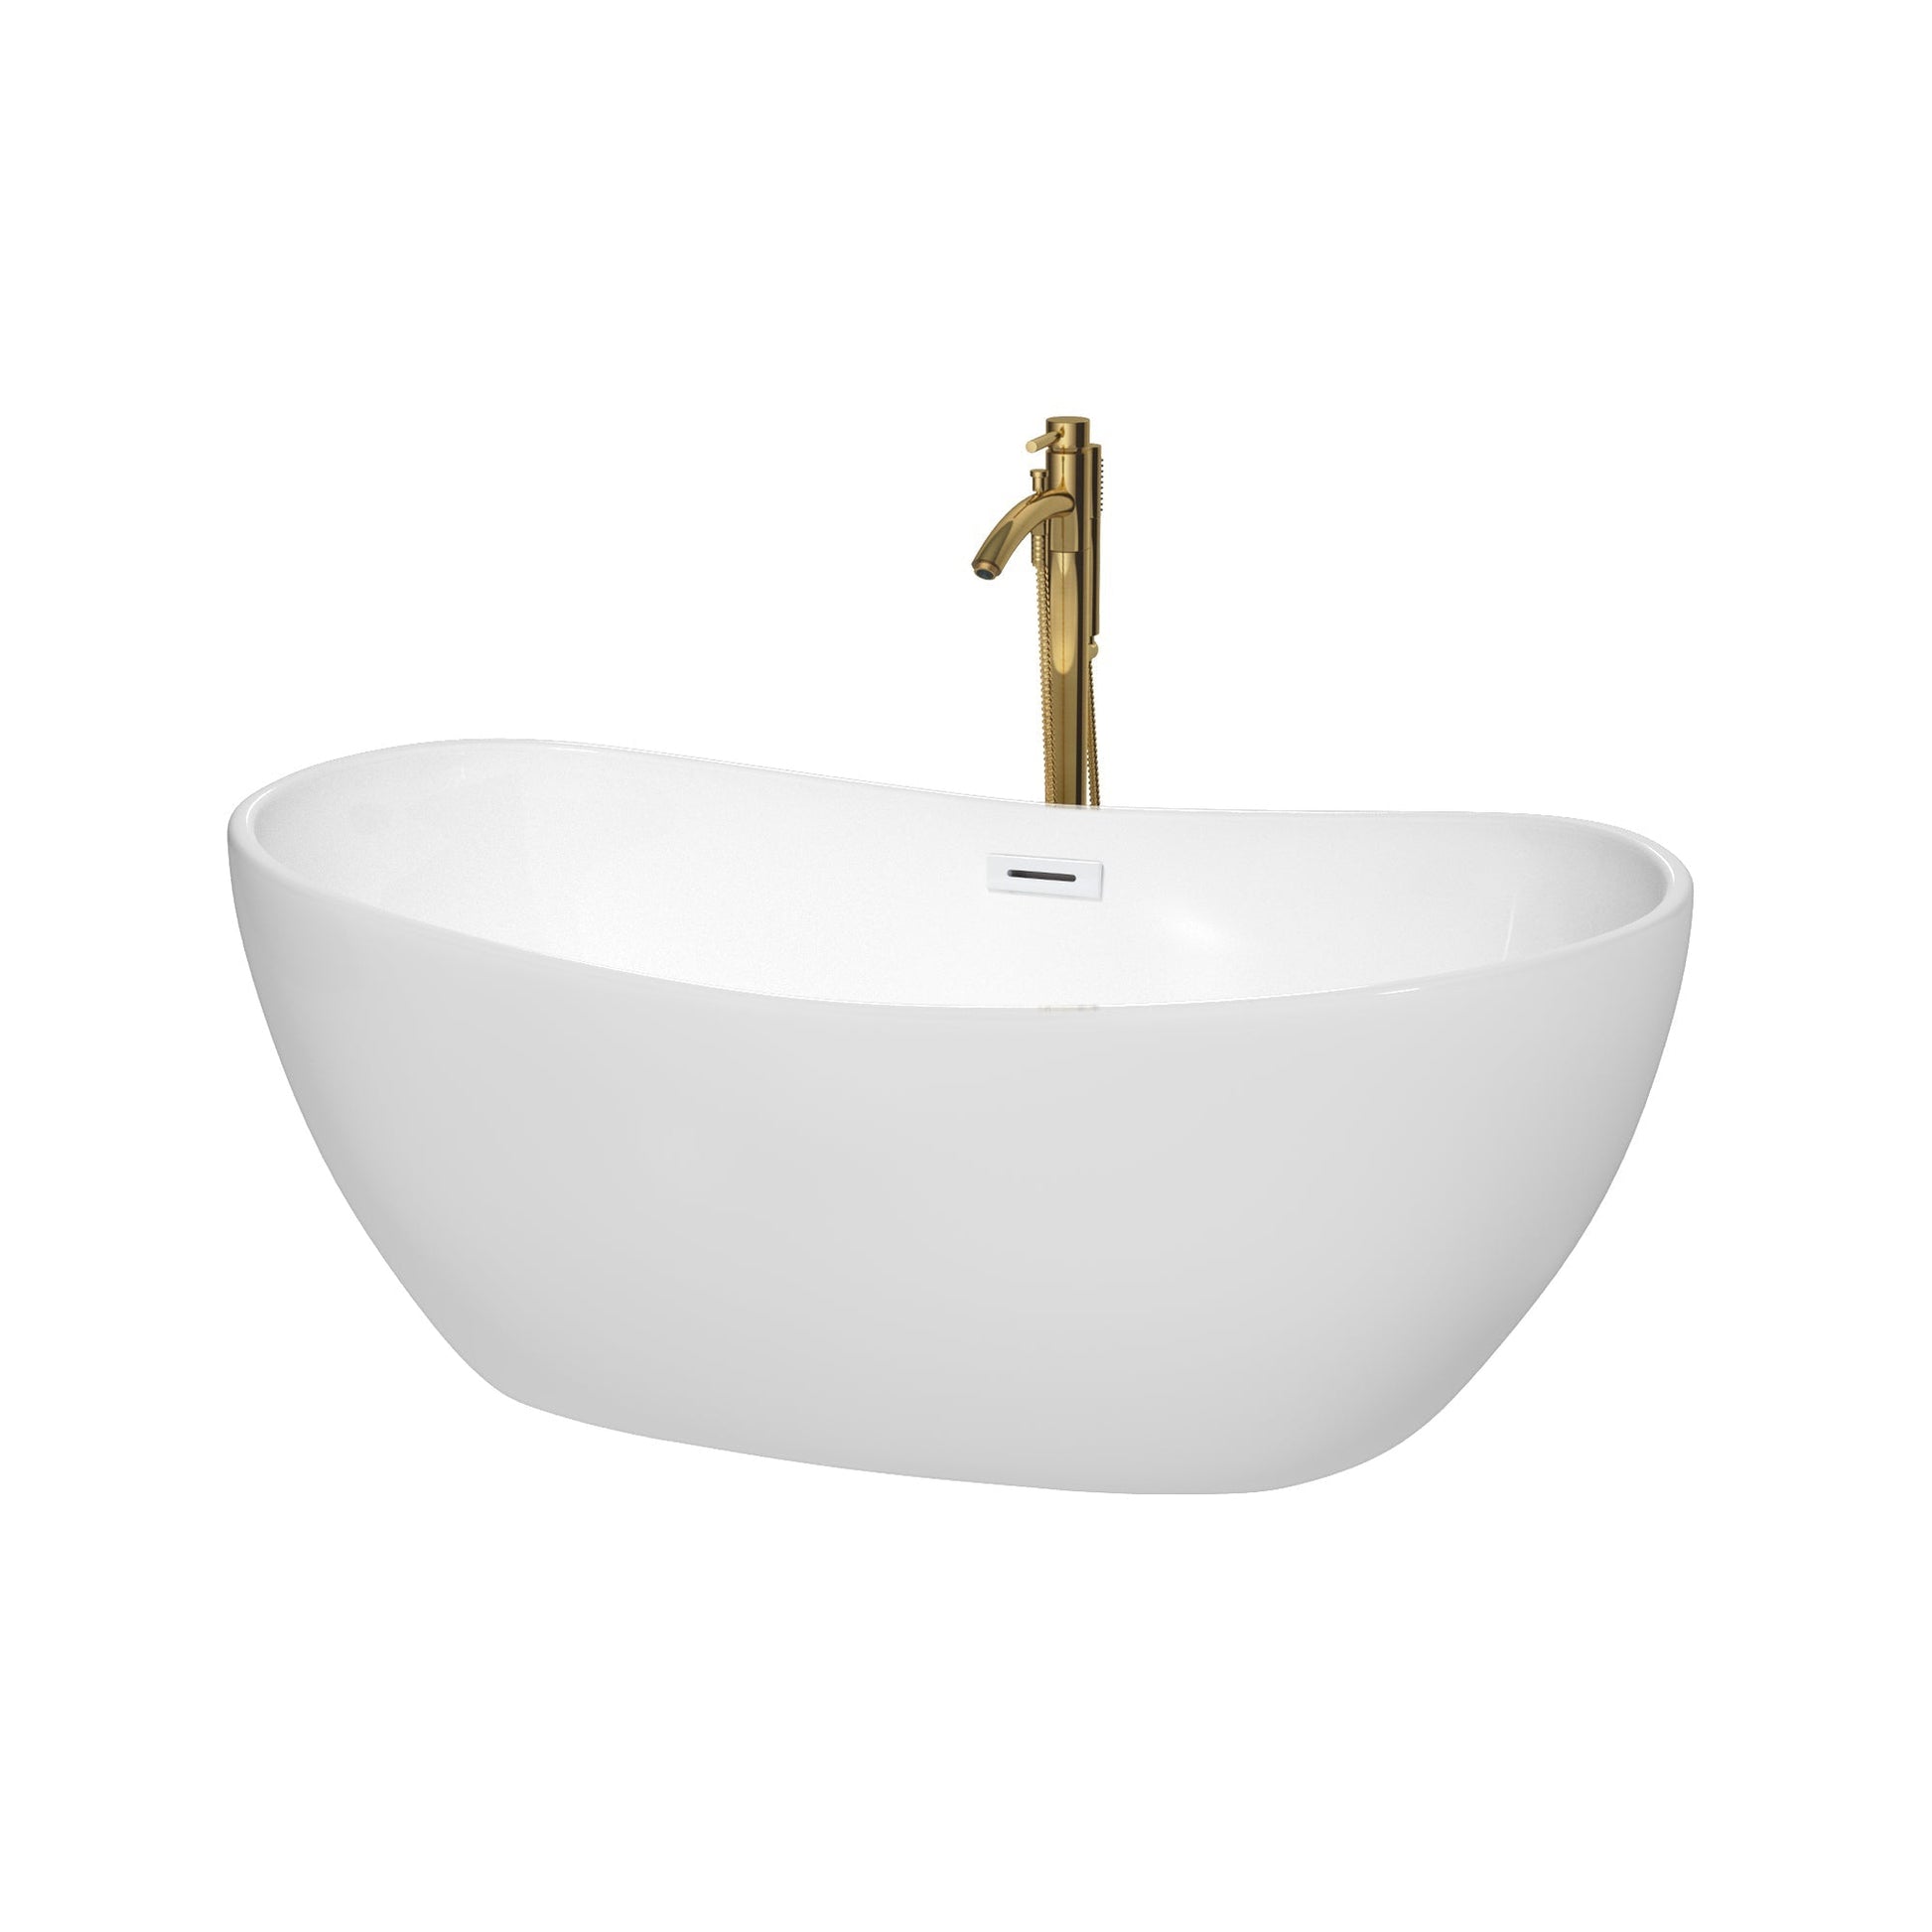 Wyndham Collection Rebecca 60" Freestanding Bathtub in White With Shiny White Trim and Floor Mounted Faucet in Brushed Gold